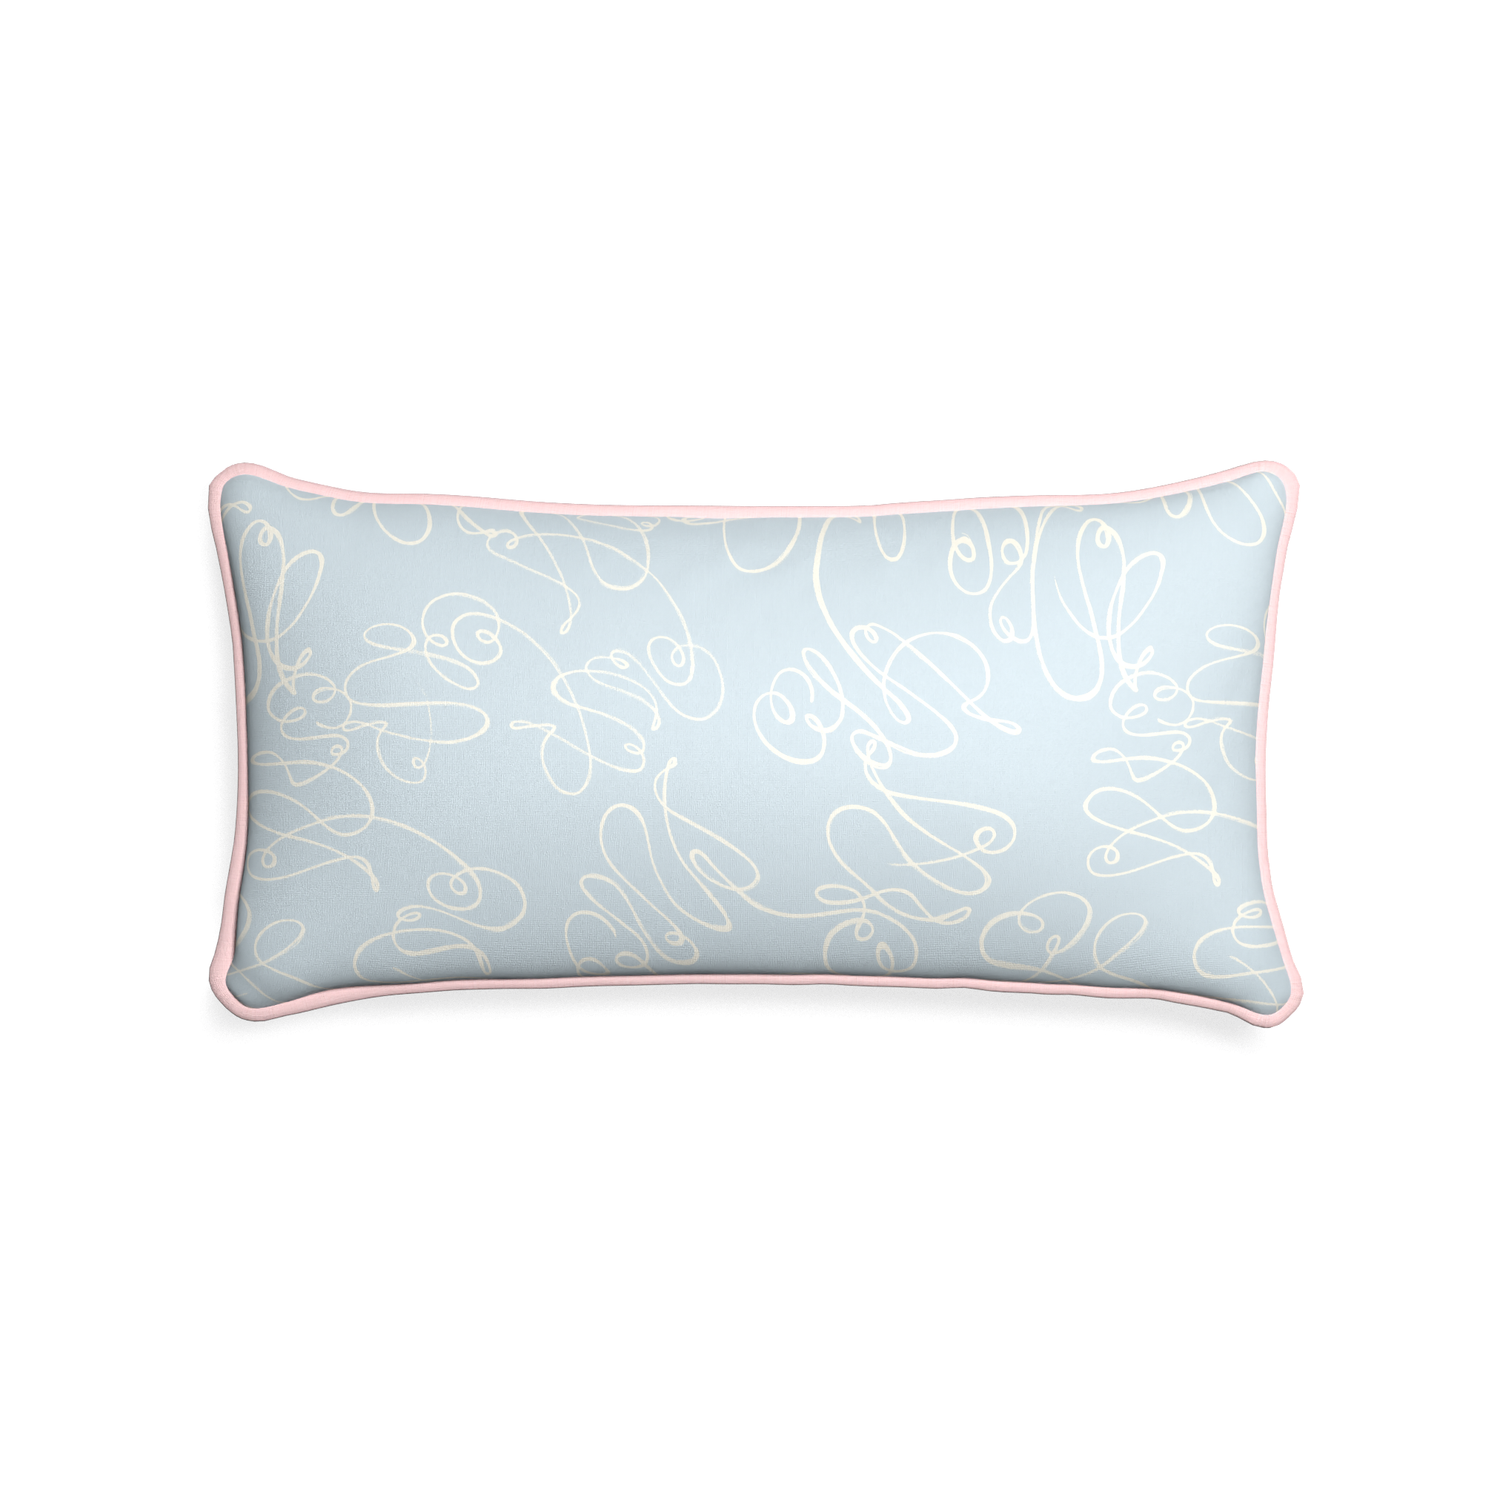 Midi-lumbar mirabella custom powder blue abstractpillow with petal piping on white background